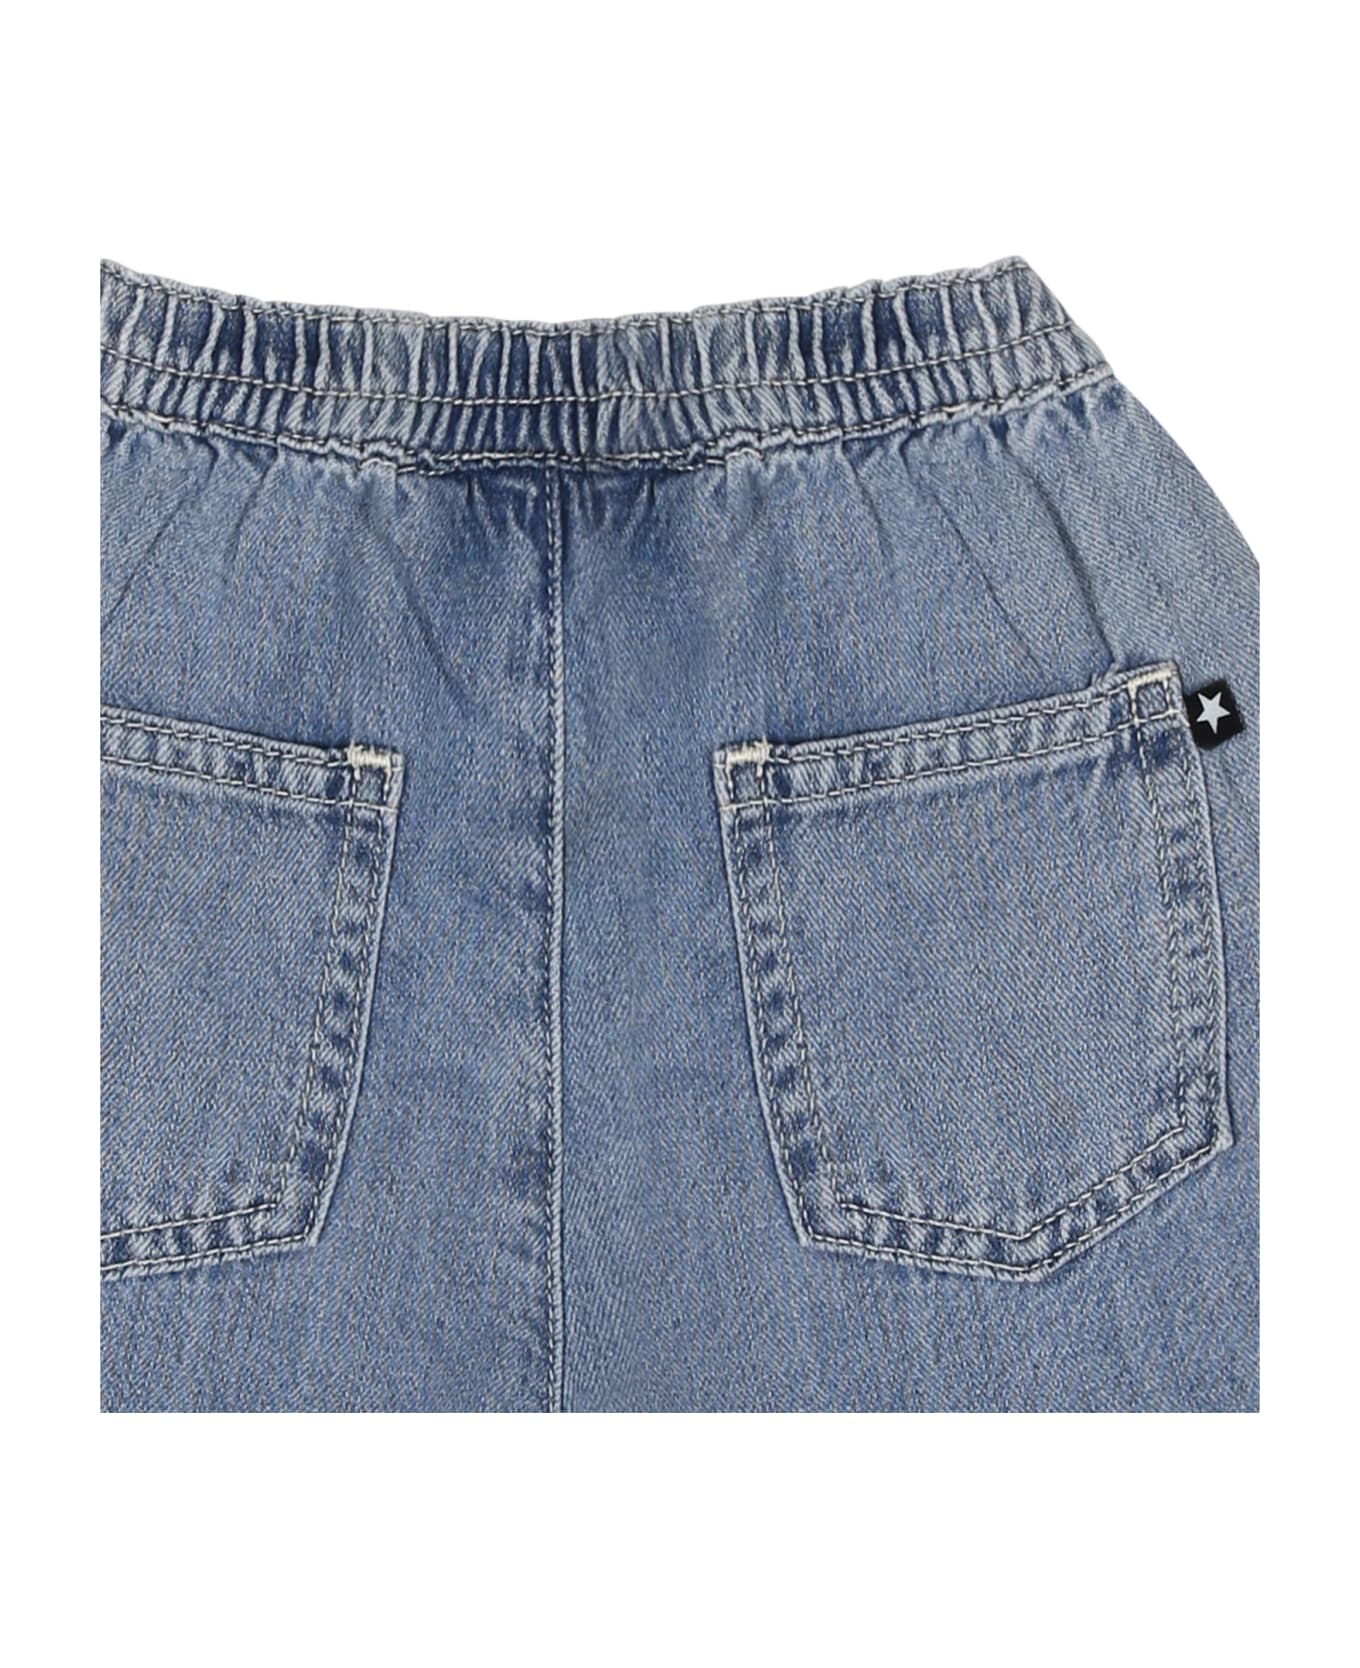 Molo Blue Jeans For Baby Boy With Smiley Face - Denim ボトムス